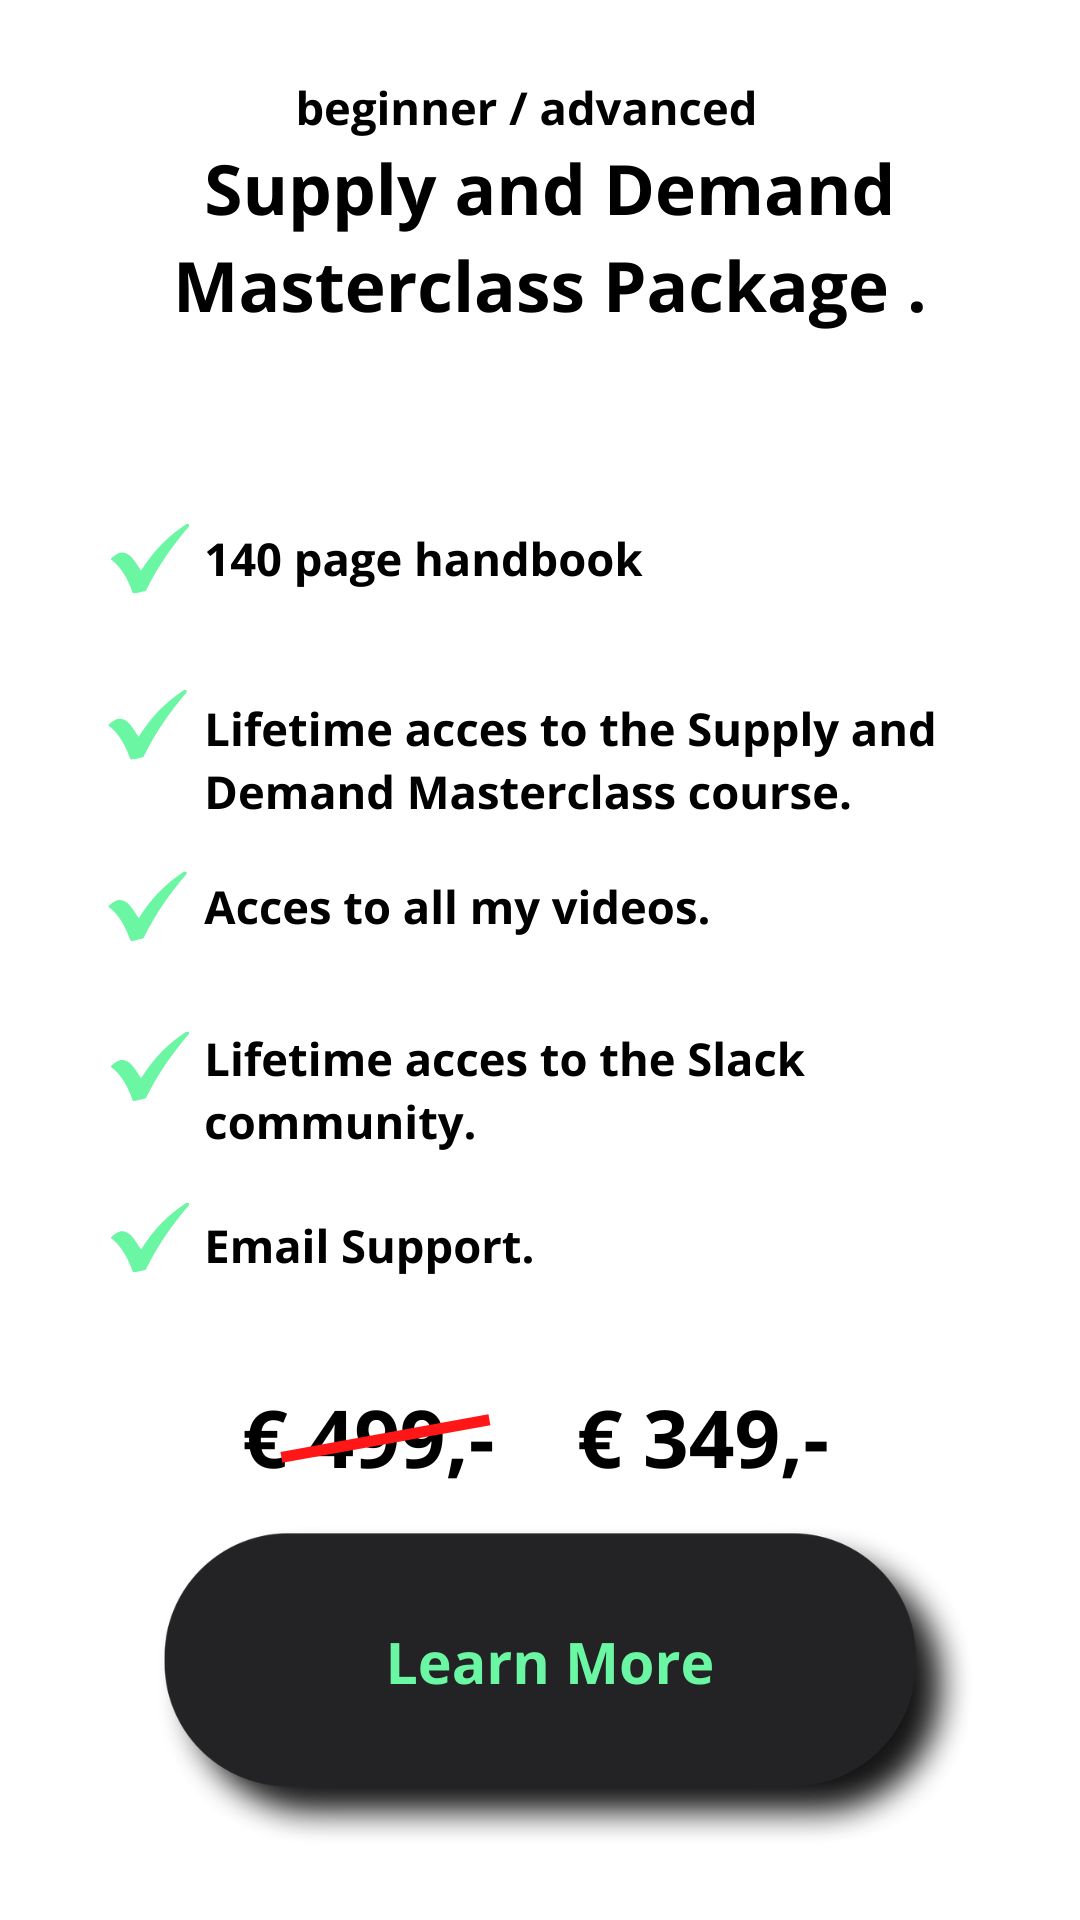 Supply and Demand Masterclass package